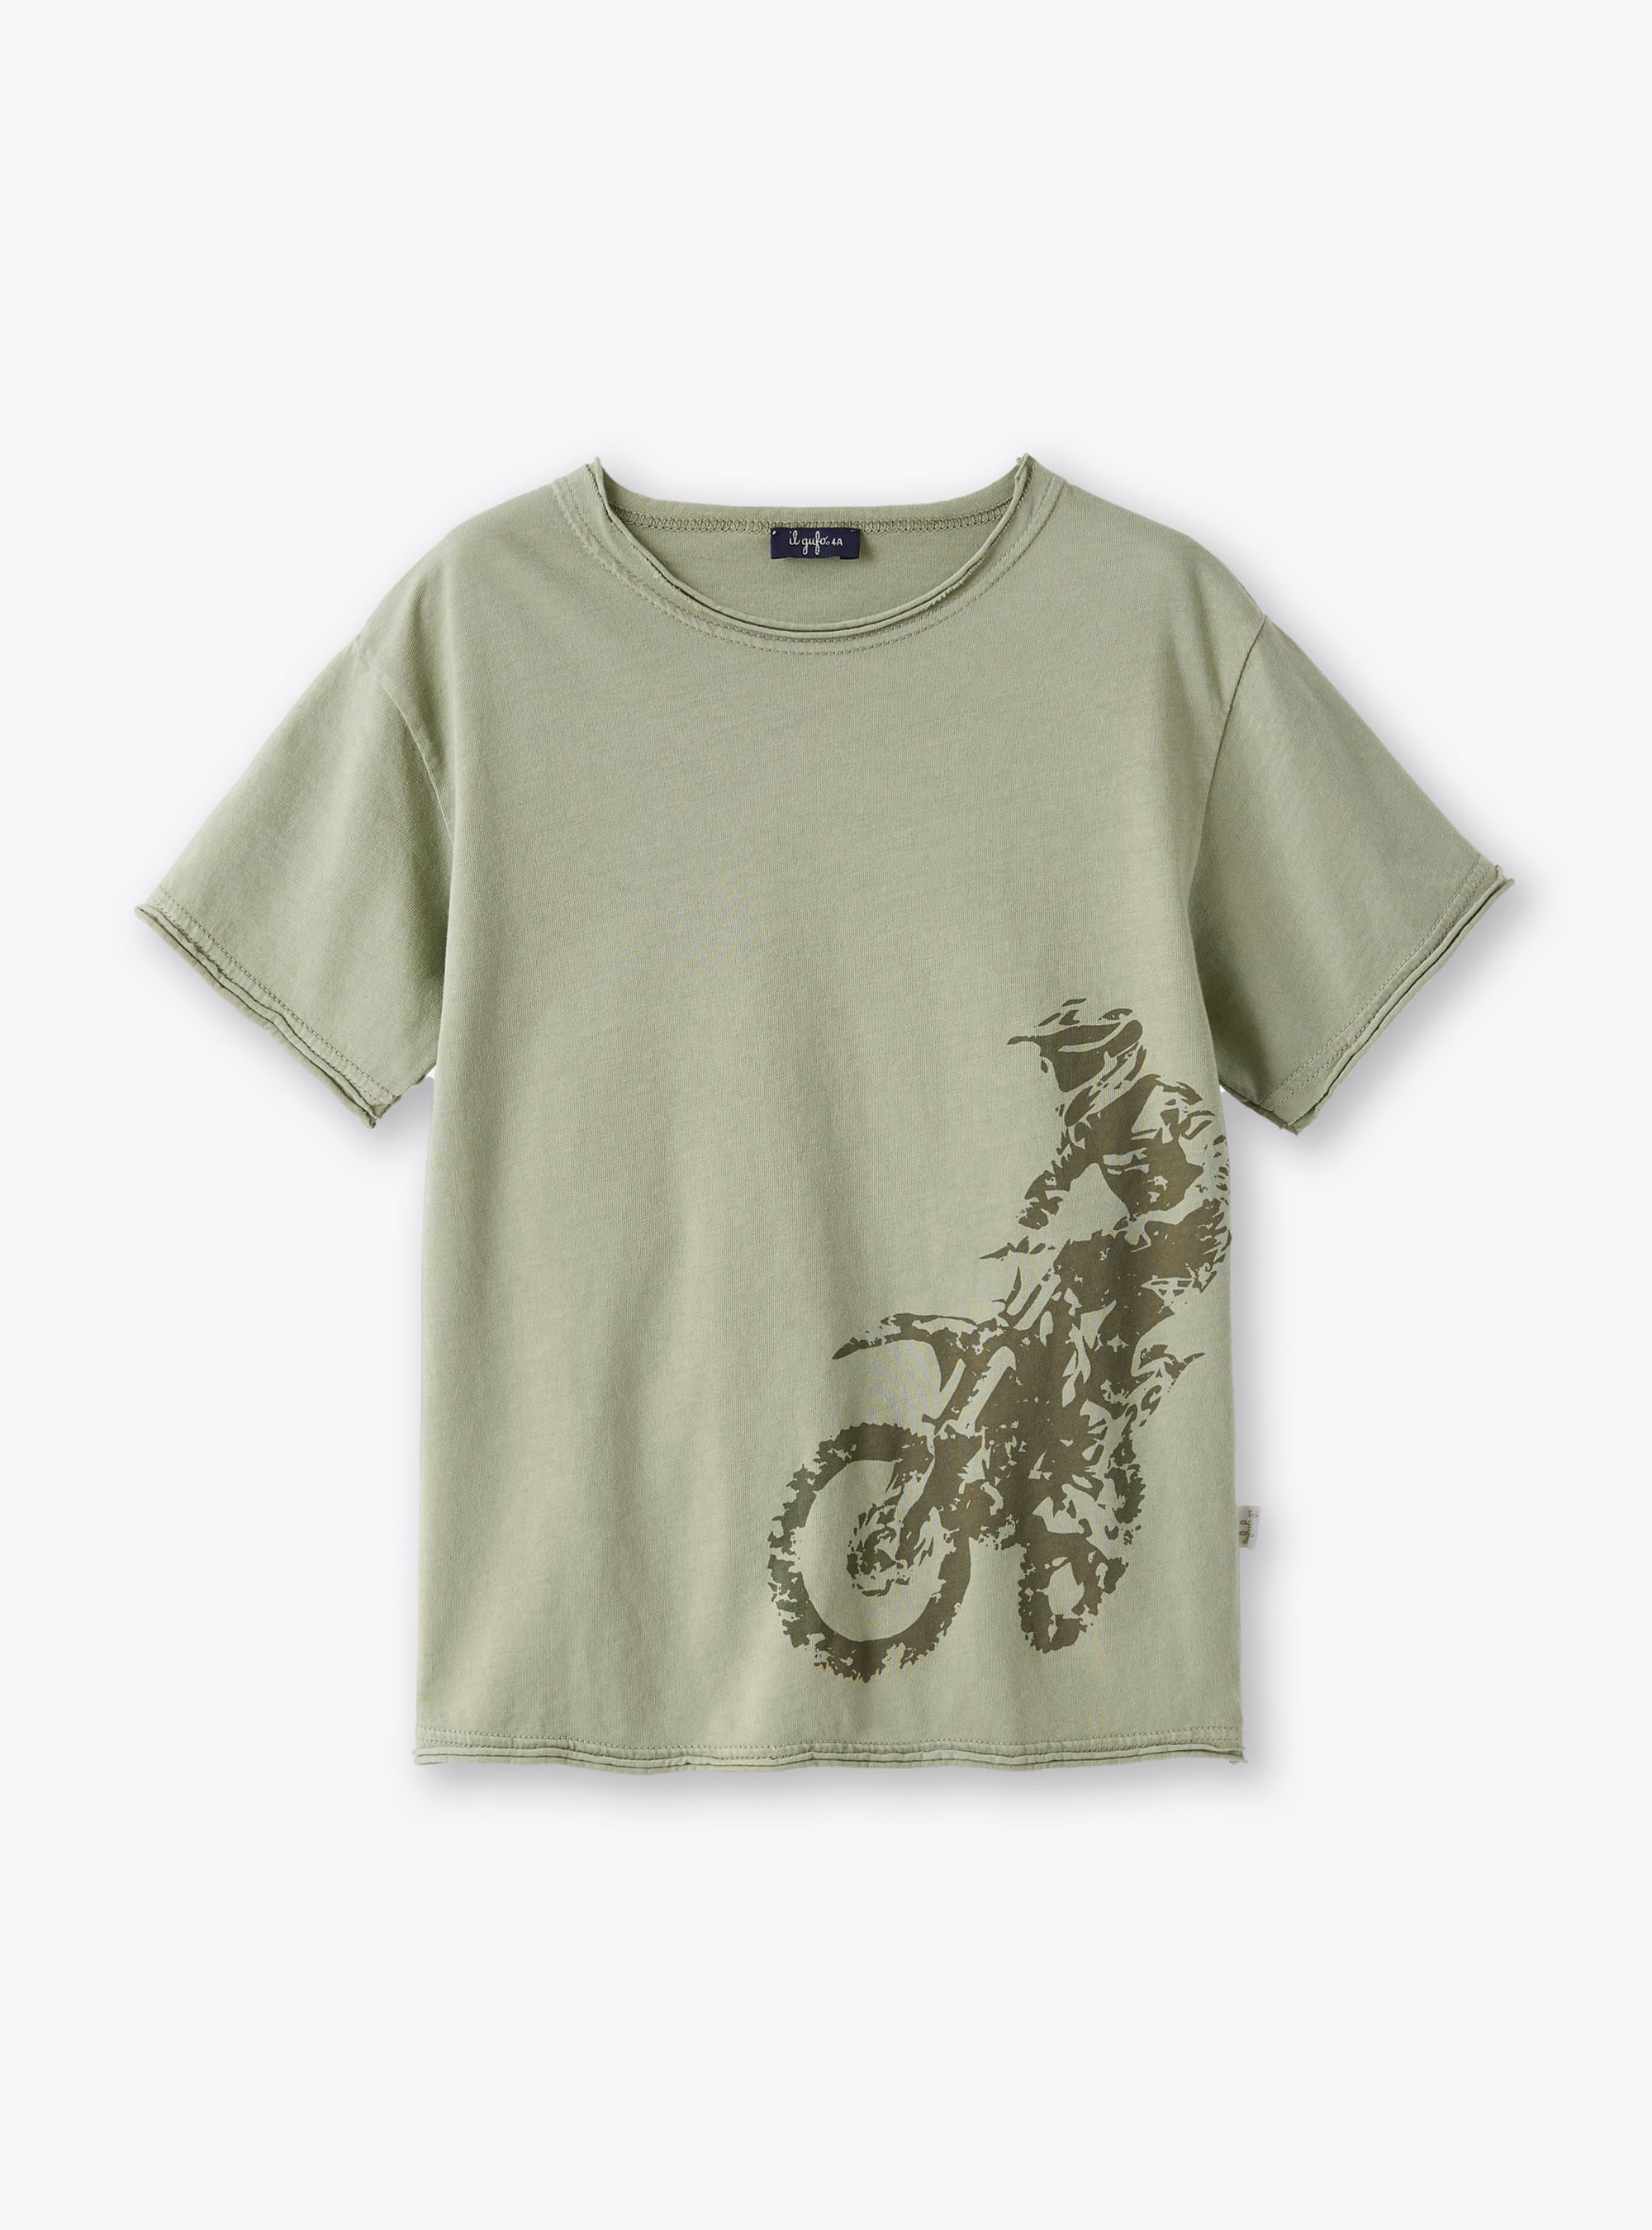 T-shirt in organic cotton with print design - T-shirts - Il Gufo